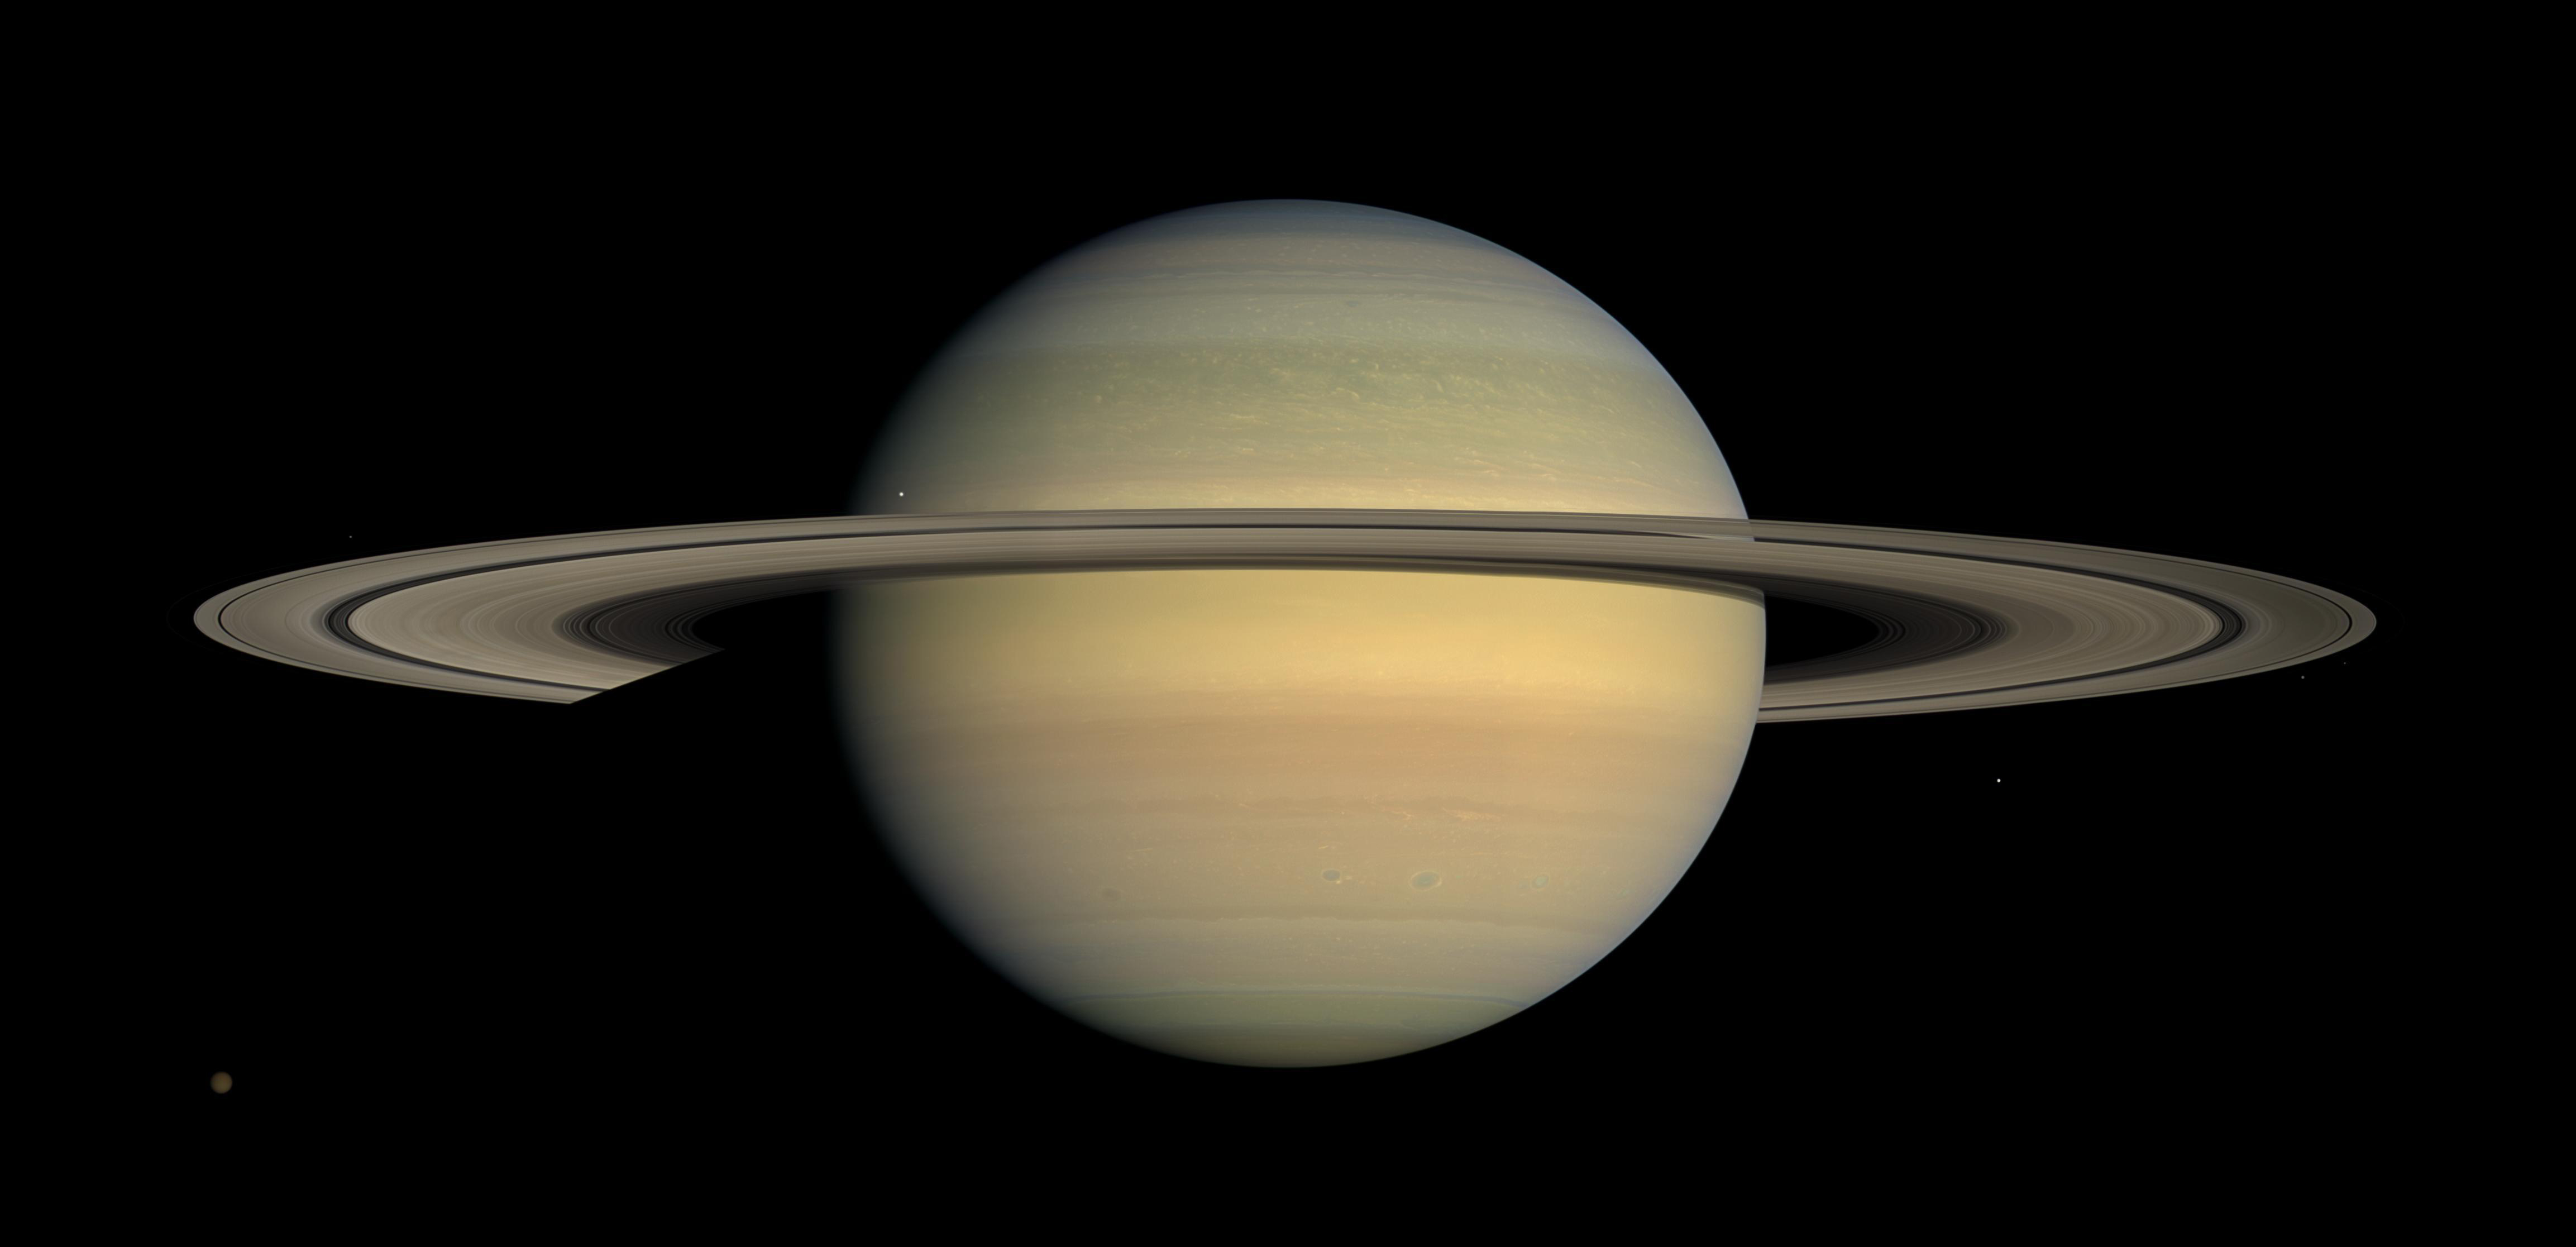 This July 23, 2008 image made available by NASA shows the planet Saturn, as seen from the Cassini spacecraft. After a 20-year voyage, Cassini is poised to dive into Saturn on Friday, Sept. 15, 2016.
 (NASA/JPL/Space Science Institute via AP)